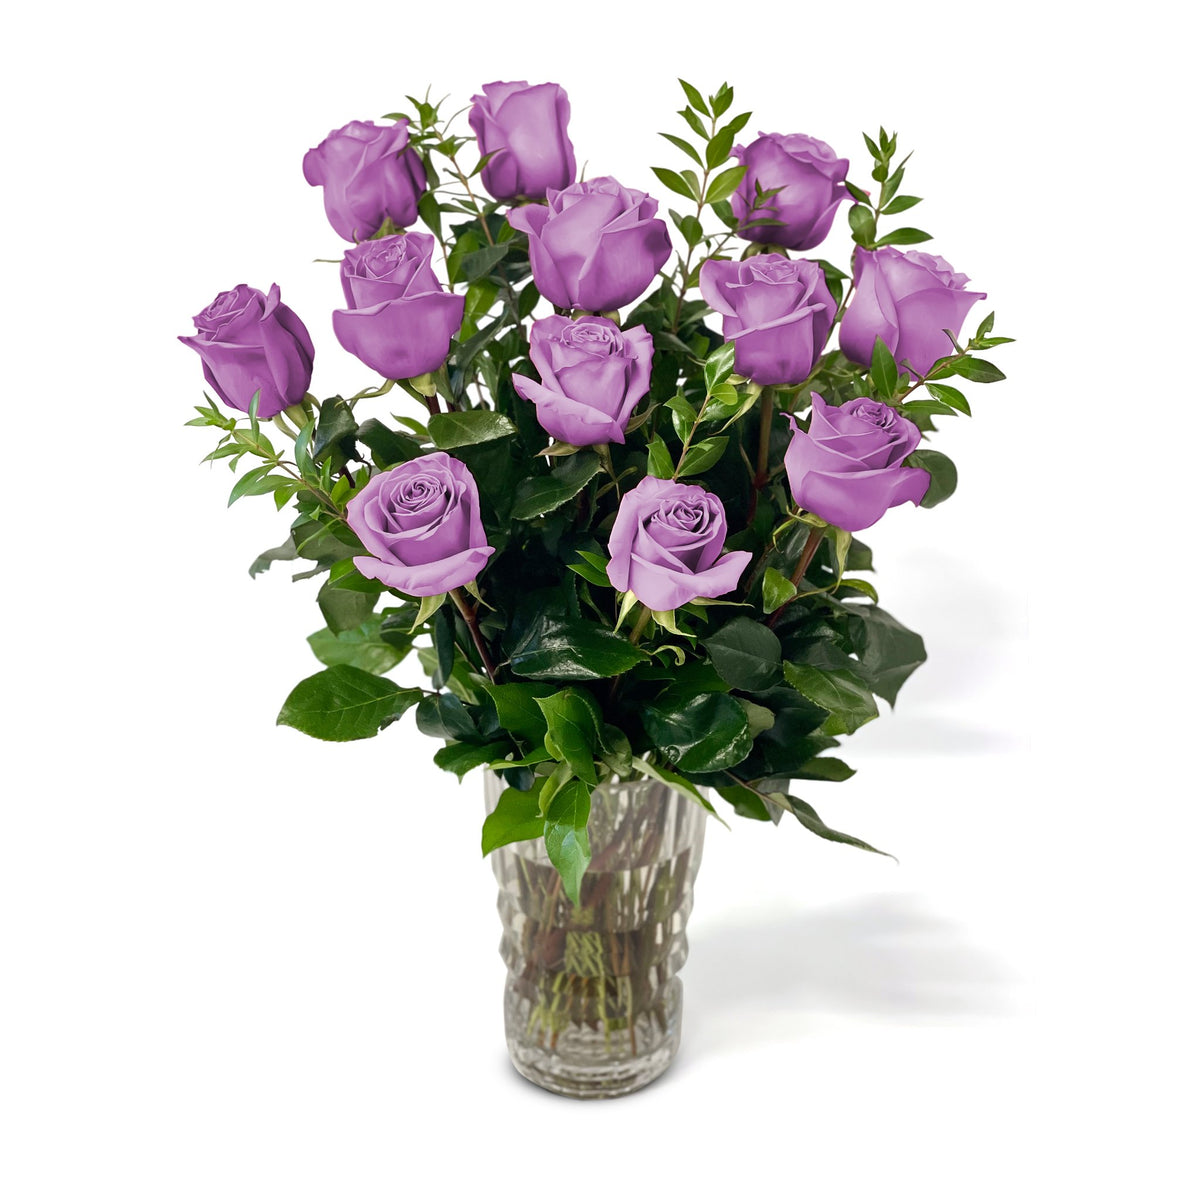 Queens Flower Delivery - Fresh Roses in a Crystal Vase | Purple - 1 Dozen